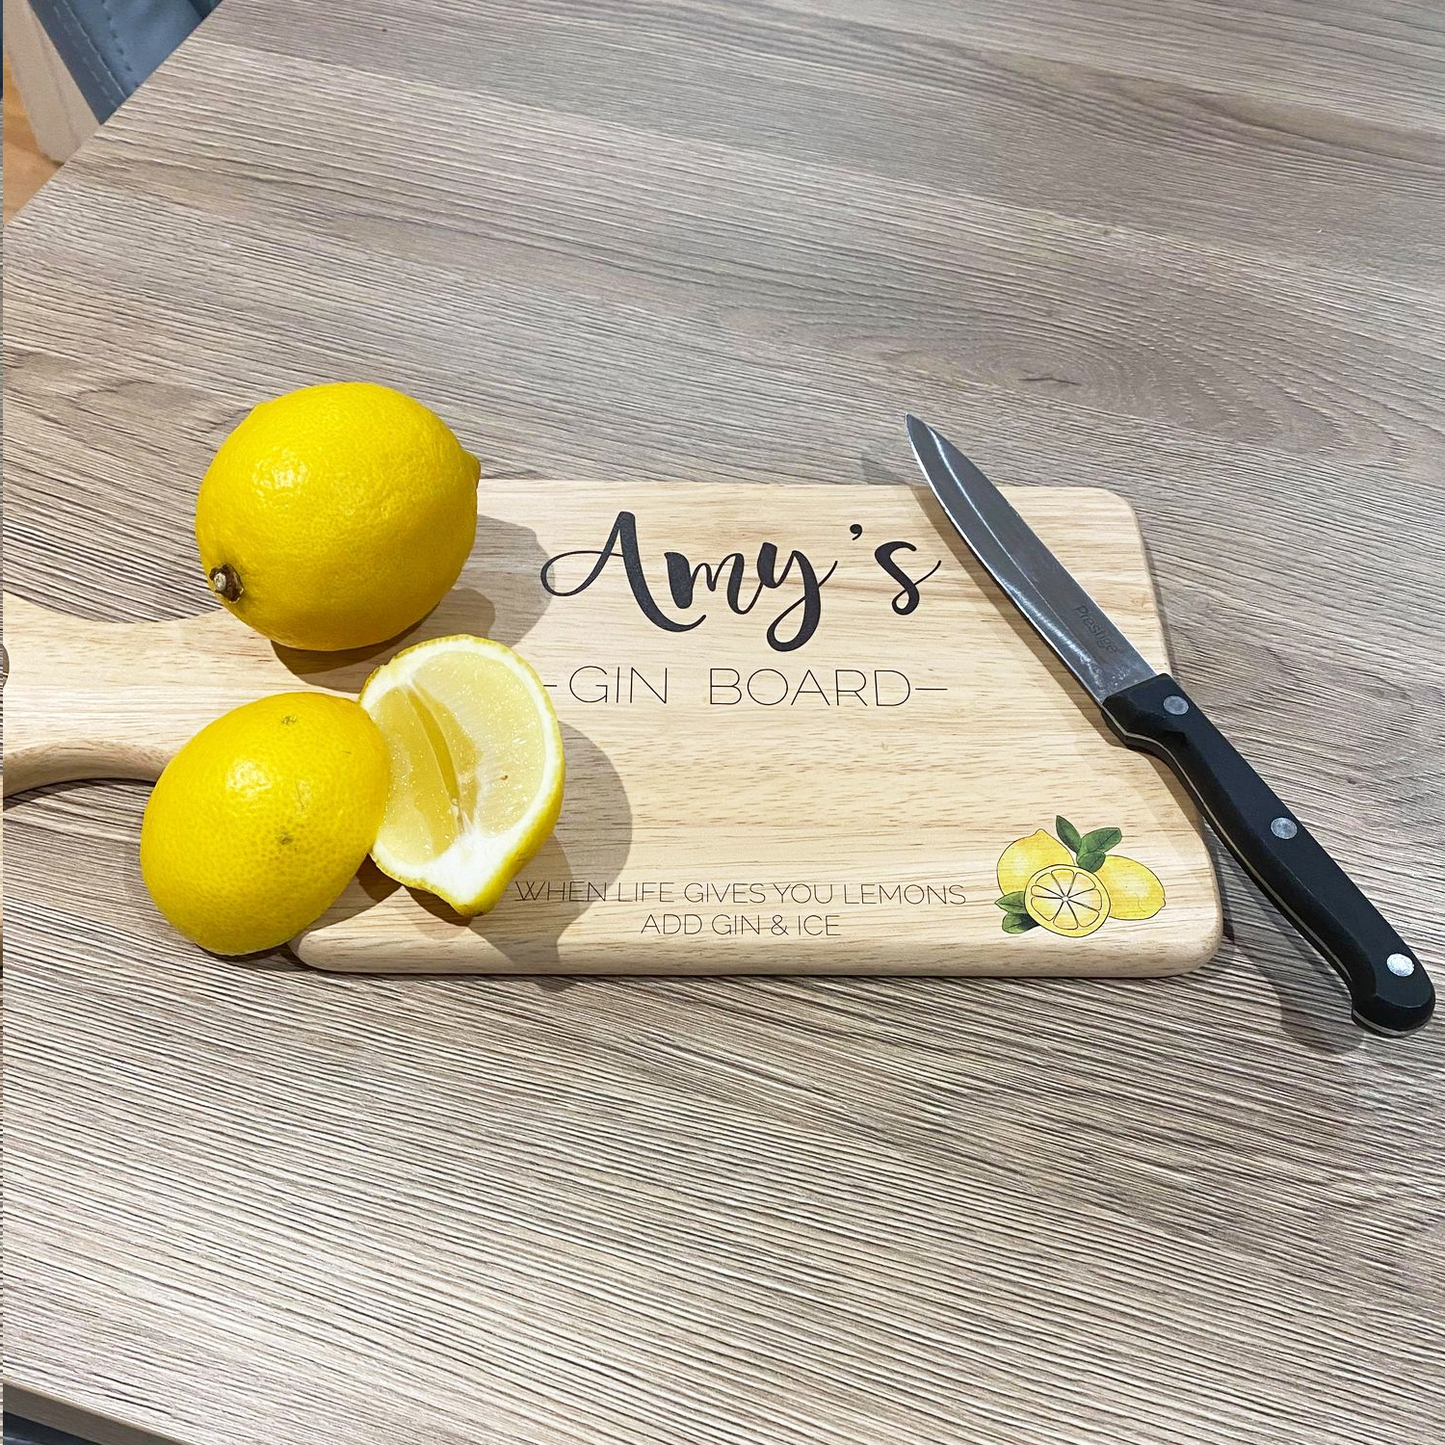 Personalised Gin Board - When life gives you lemons add gin & ice. Gift Idea